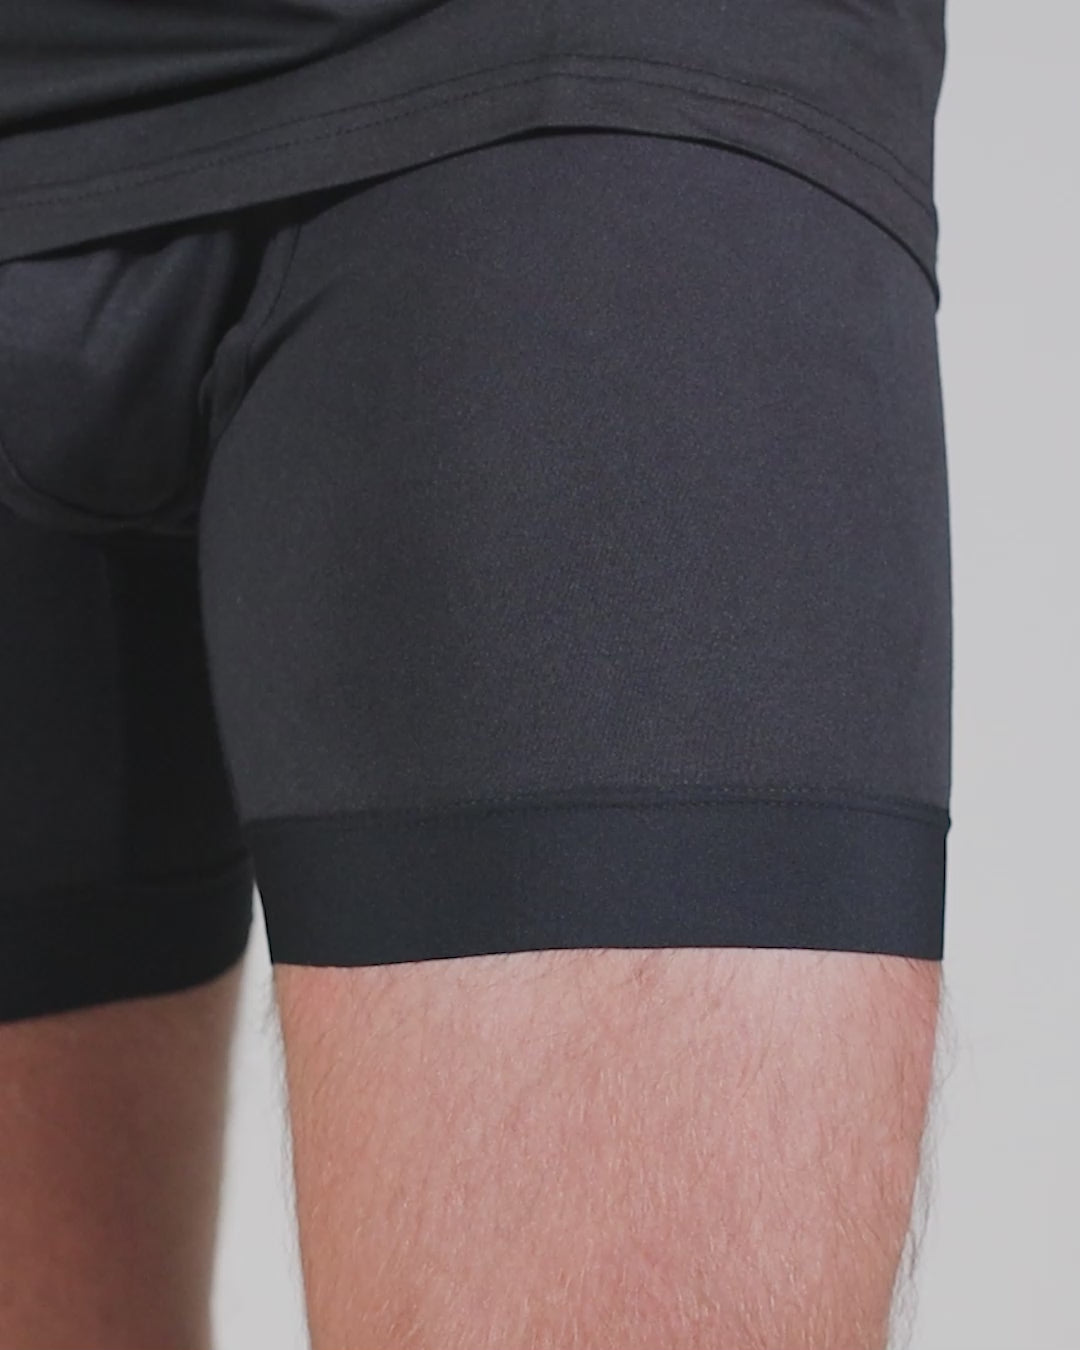 Tactical II Compression Shorts for Men–Athletic Baselayer